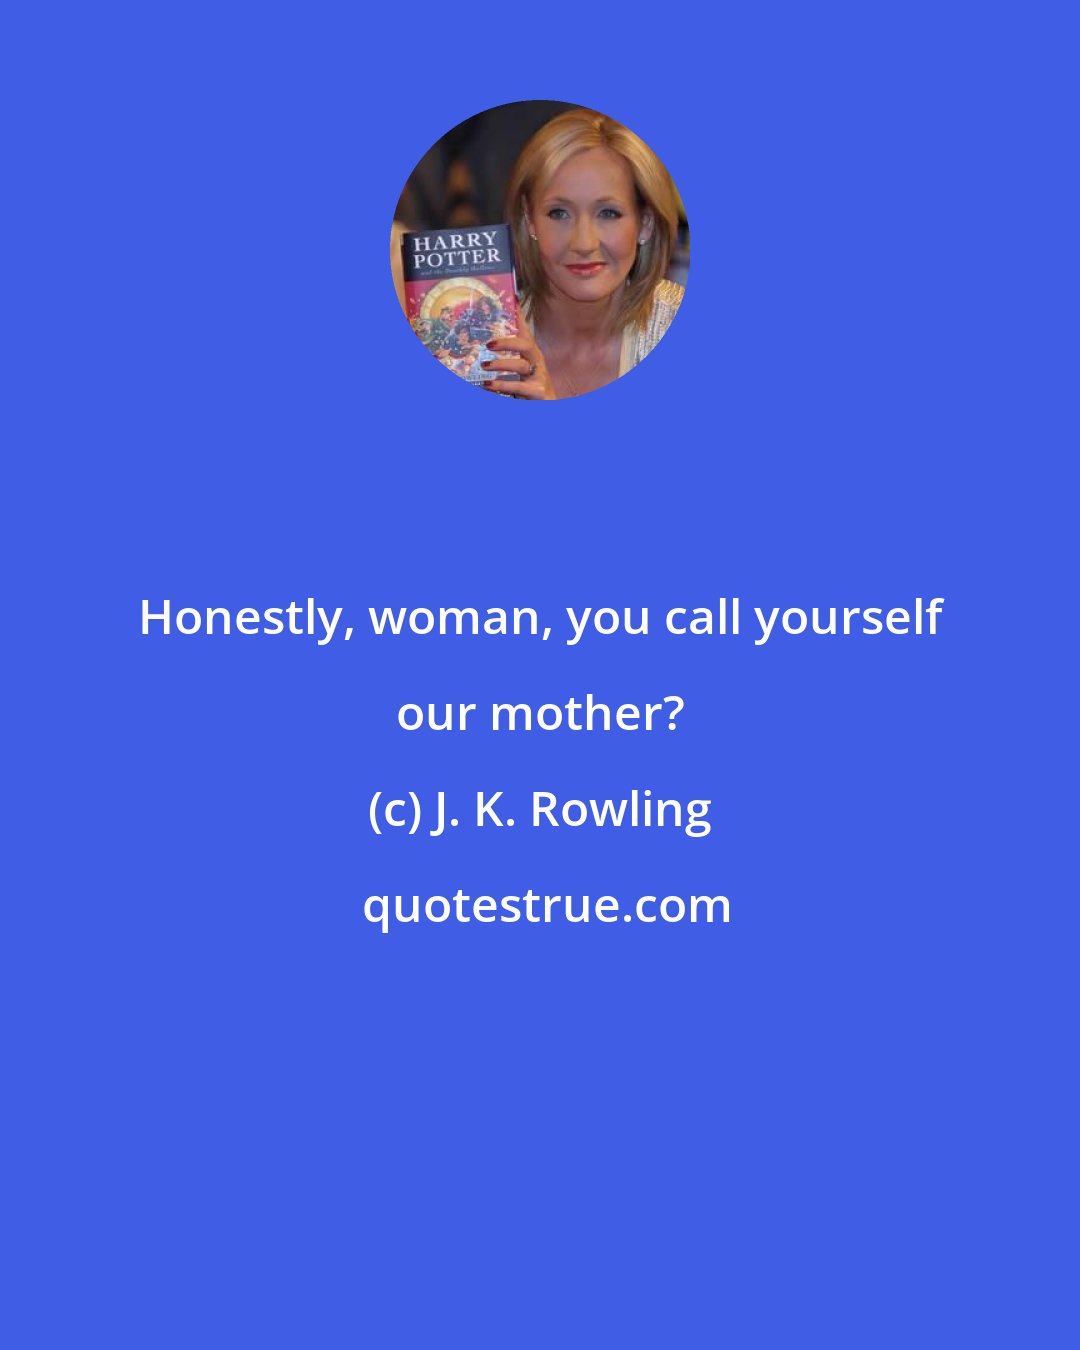 J. K. Rowling: Honestly, woman, you call yourself our mother?